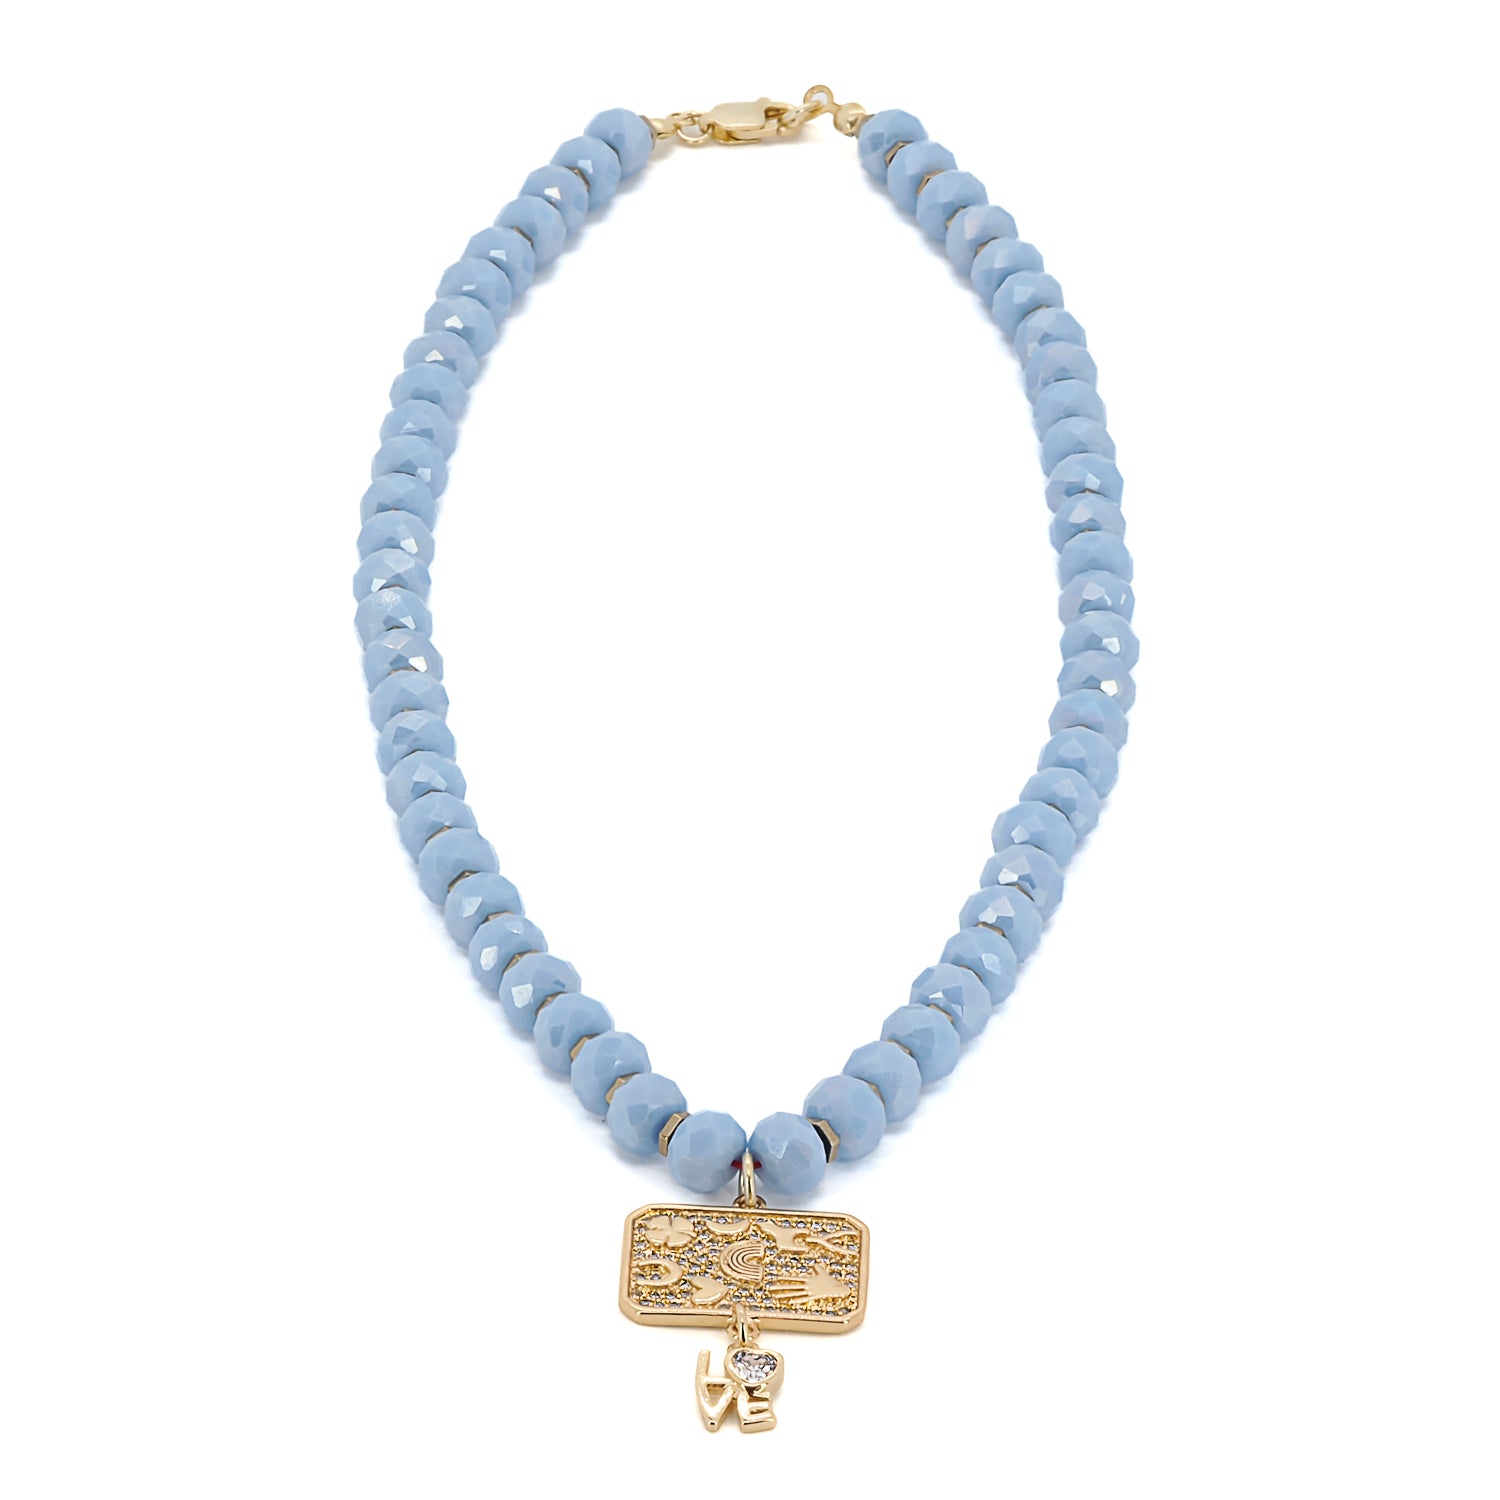 This necklace is a meaningful talisman that offers protection and good fortune.